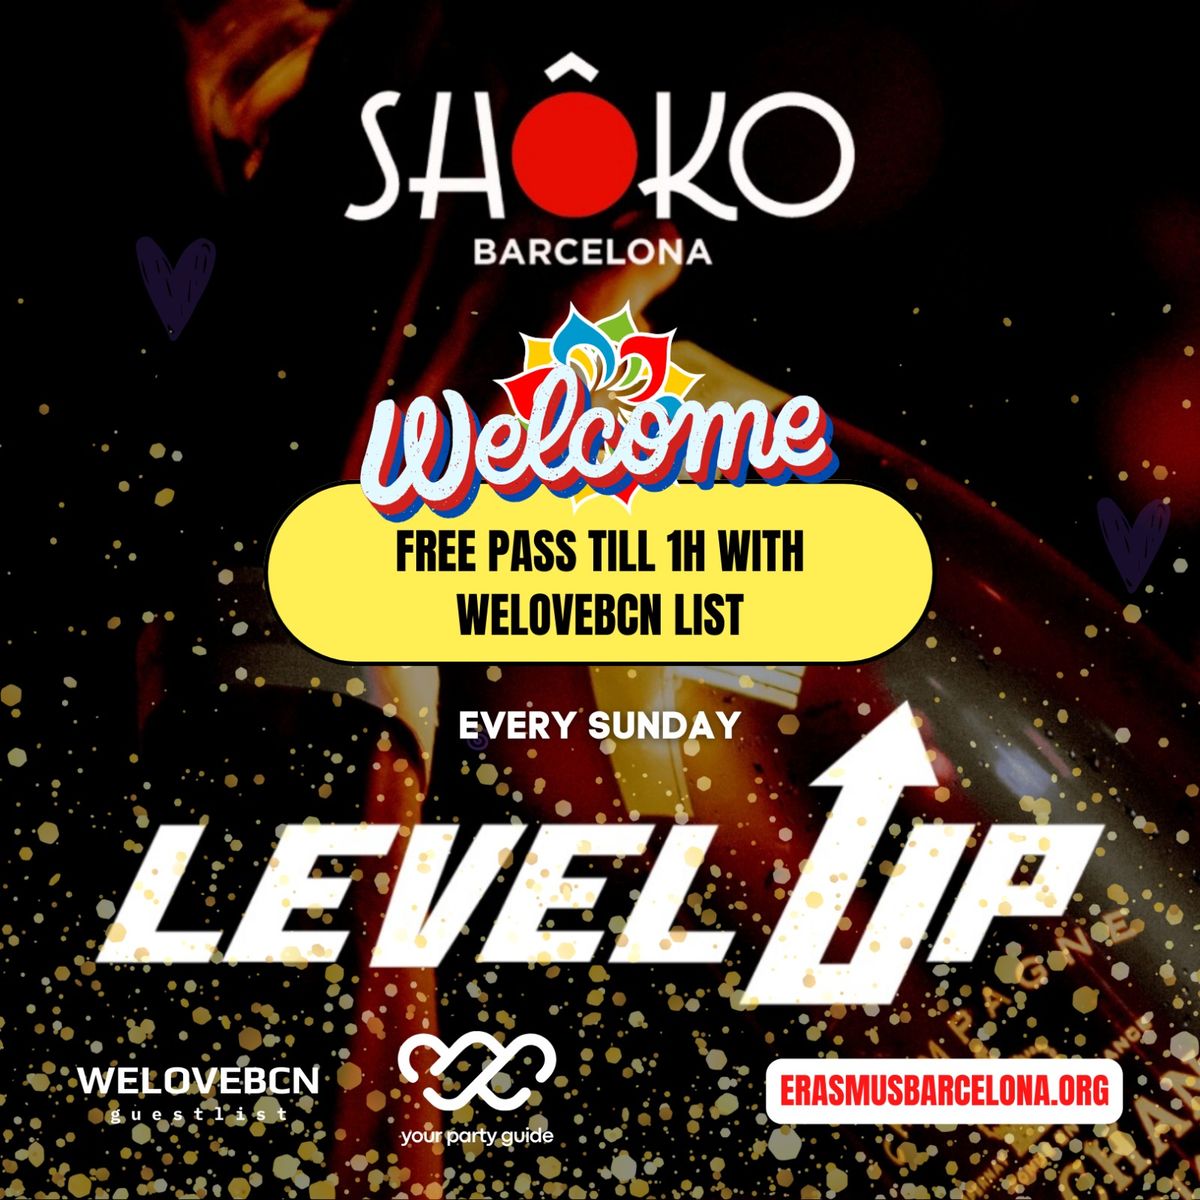 EVERY SUNDAY SHOKO FREE PARTY  with WELOVEBCN GUESTLIST\ud83e\udd73